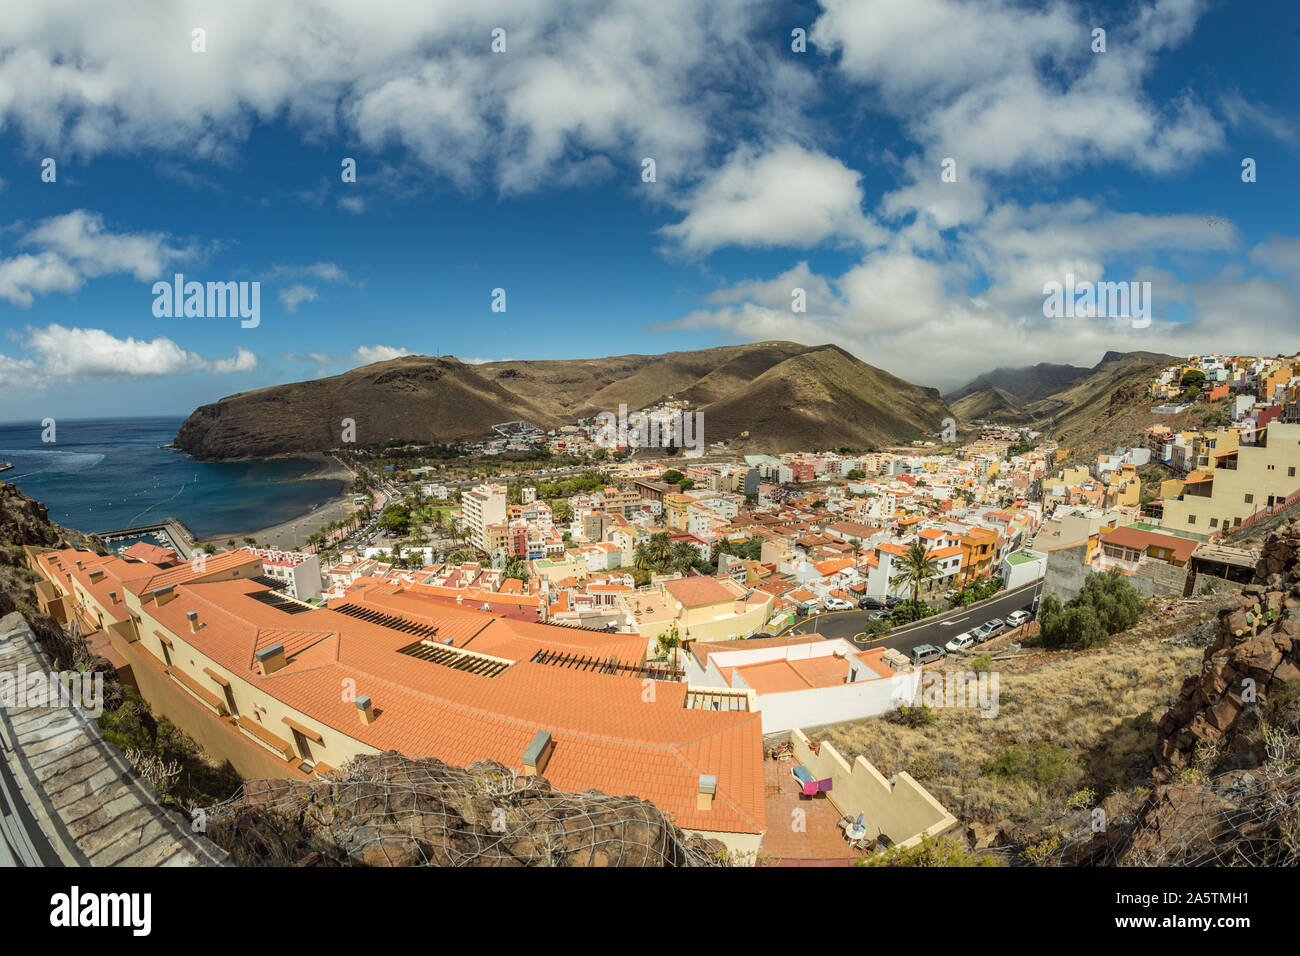 Aerial view from mountains to the main port of the island of La Gomera. Colorful roofs and houses on slope of Volcano in San Sebastian de la Gomera, S Stock Photo